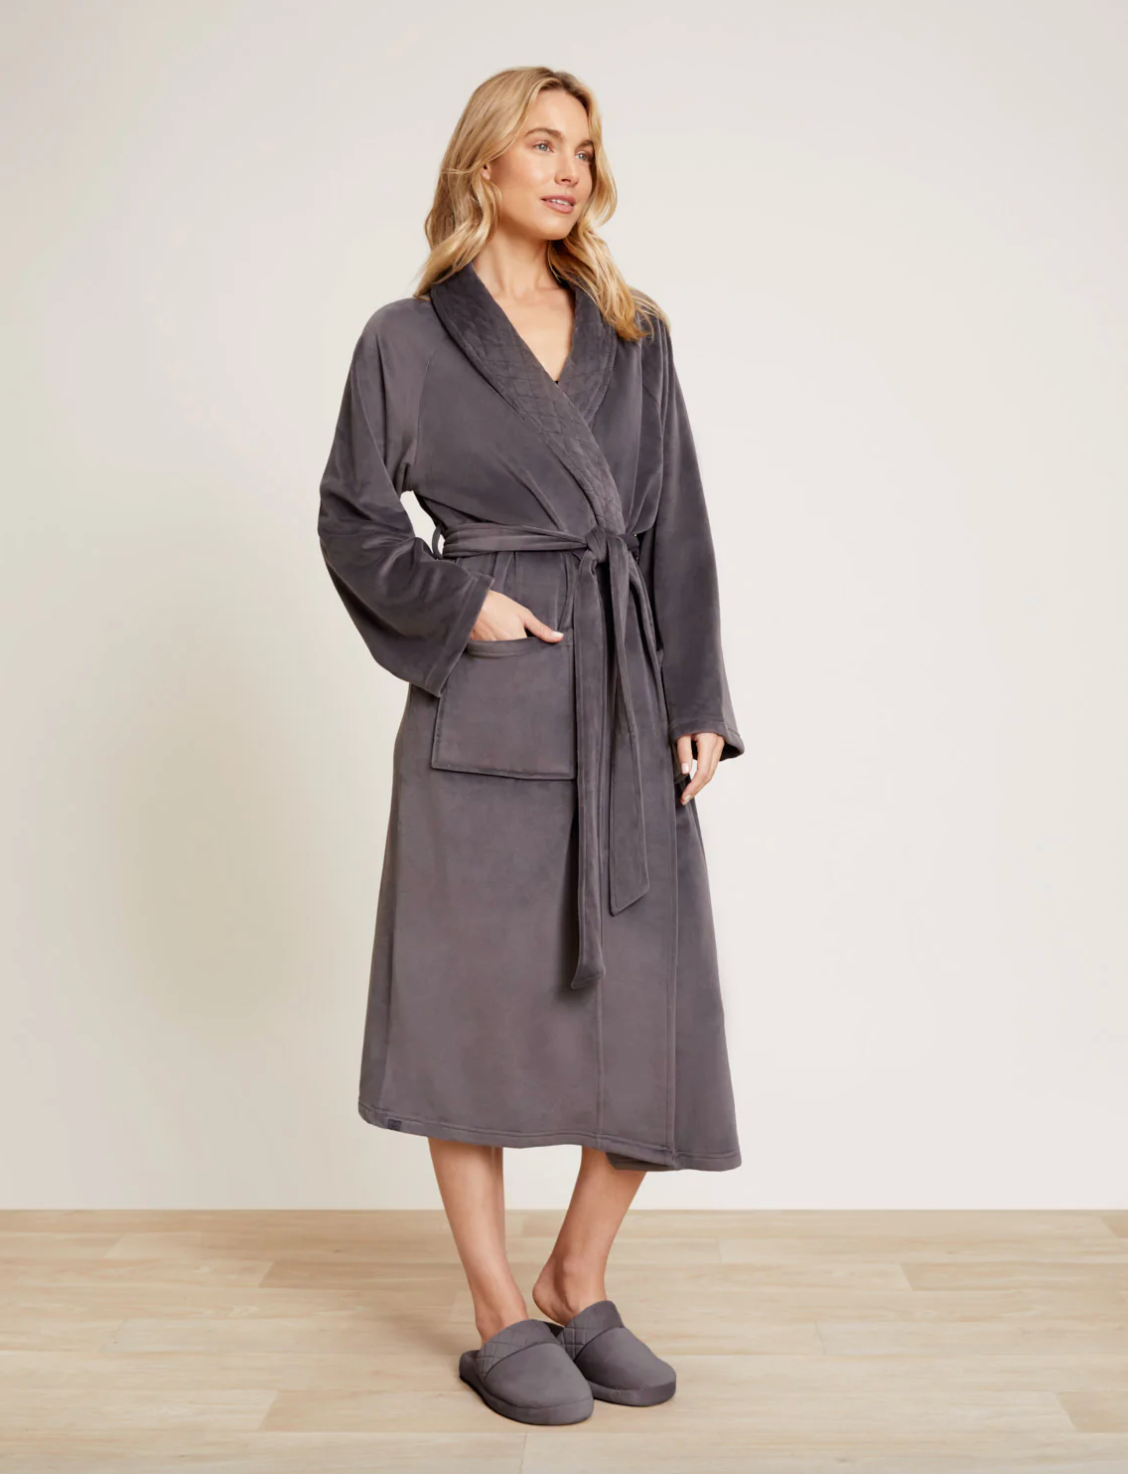 Barefoot Dreams Luxe Chic Robe Loungewear in Carbon at Wrapsody